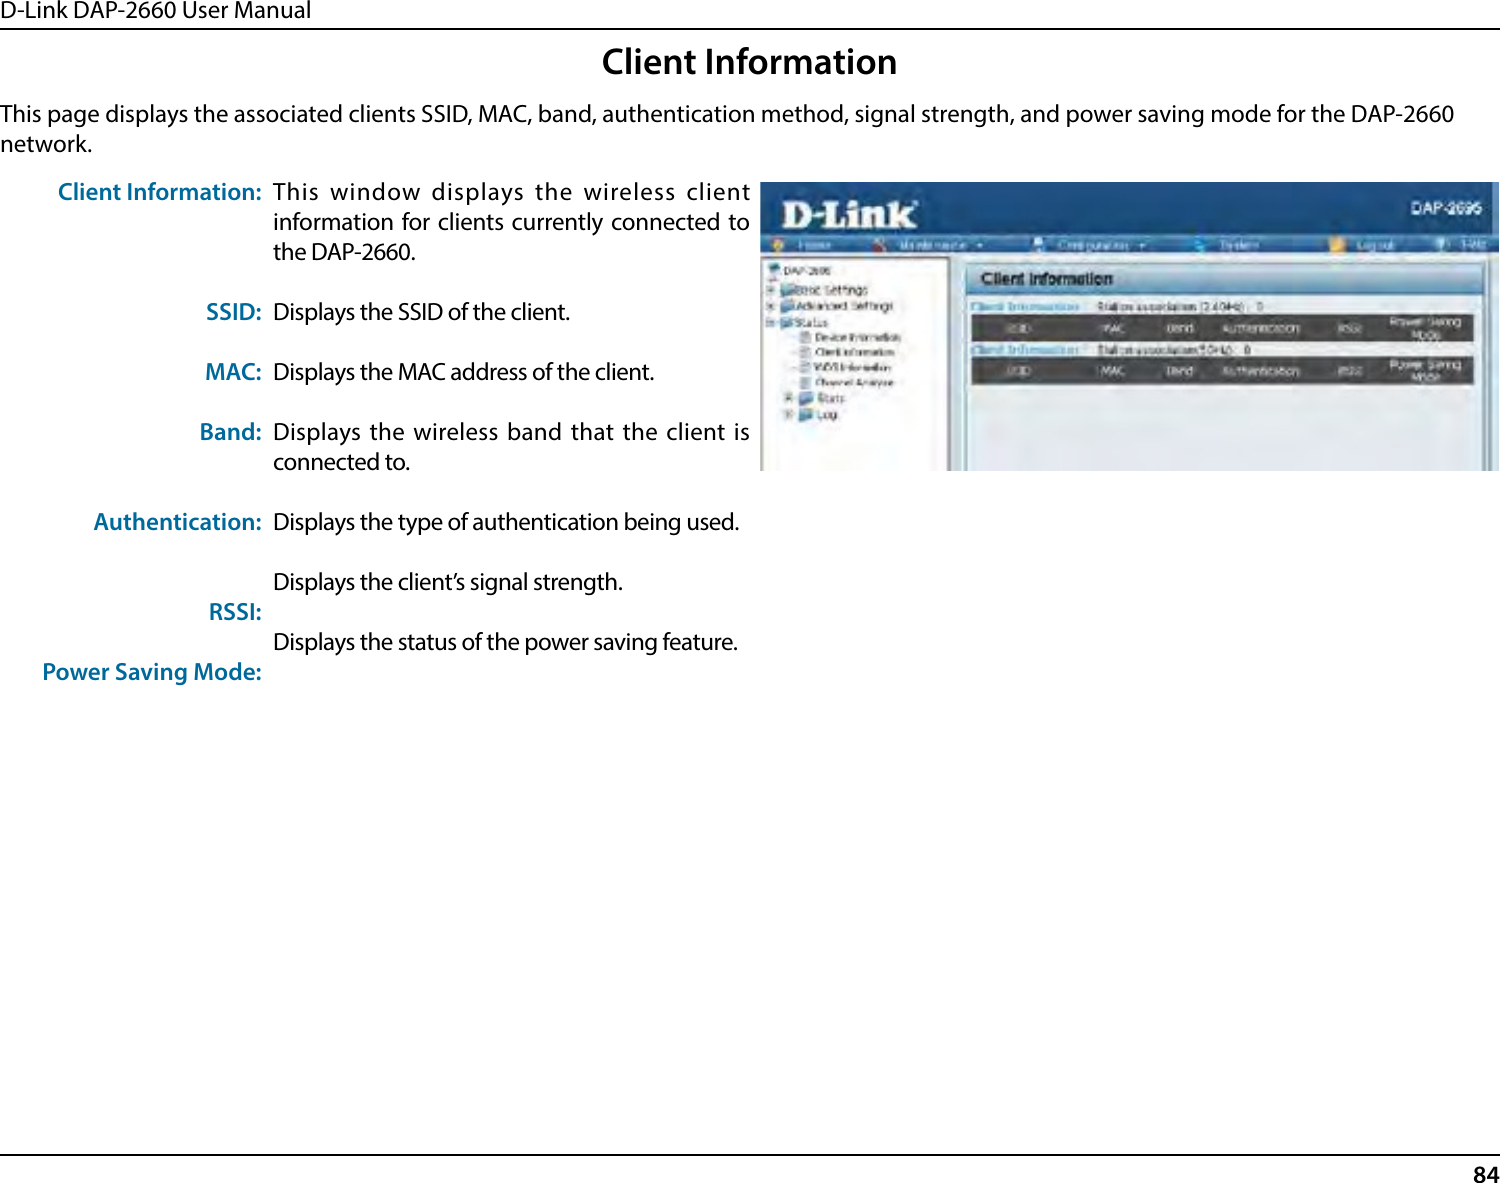 D-Link DAP-2660 User Manual84Client InformationThis page displays the associated clients SSID, MAC, band, authentication method, signal strength, and power saving mode for the DAP-2660 network.Client Information:SSID:MAC:Band:Authentication:RSSI:Power Saving Mode:This window displays the wireless client information for clients currently connected to the DAP-2660.Displays the SSID of the client.Displays the MAC address of the client.Displays the wireless band that the client is connected to.Displays the type of authentication being used.Displays the client’s signal strength.Displays the status of the power saving feature.